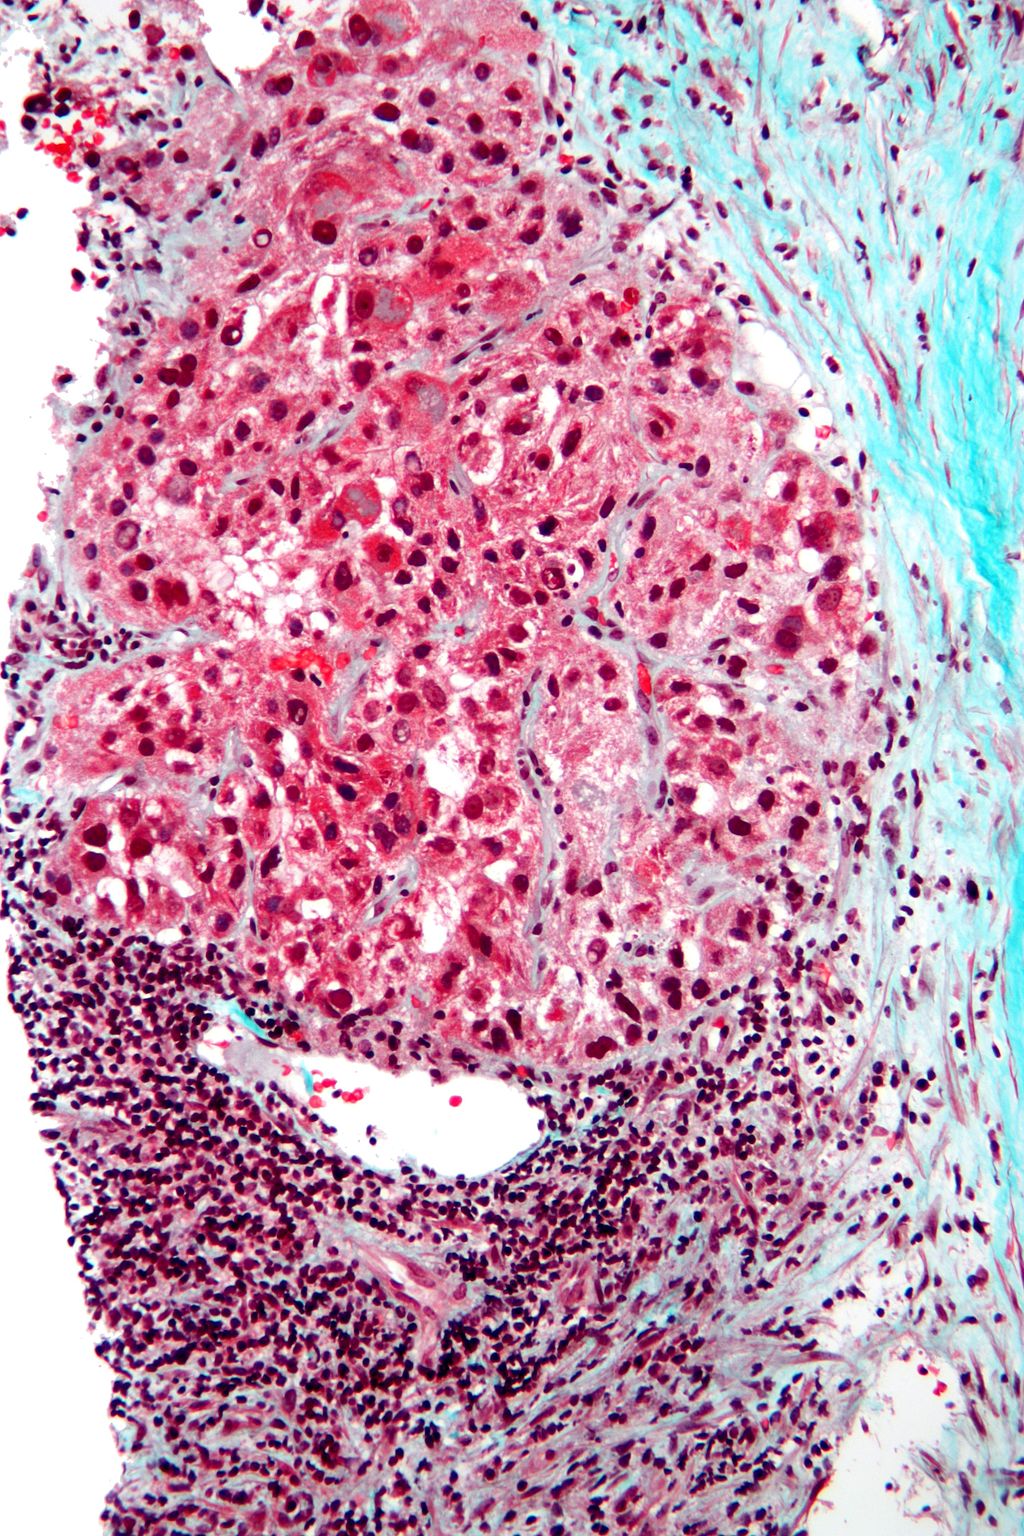 Biopsy of a HCC prepared with a trichrome stain (source)